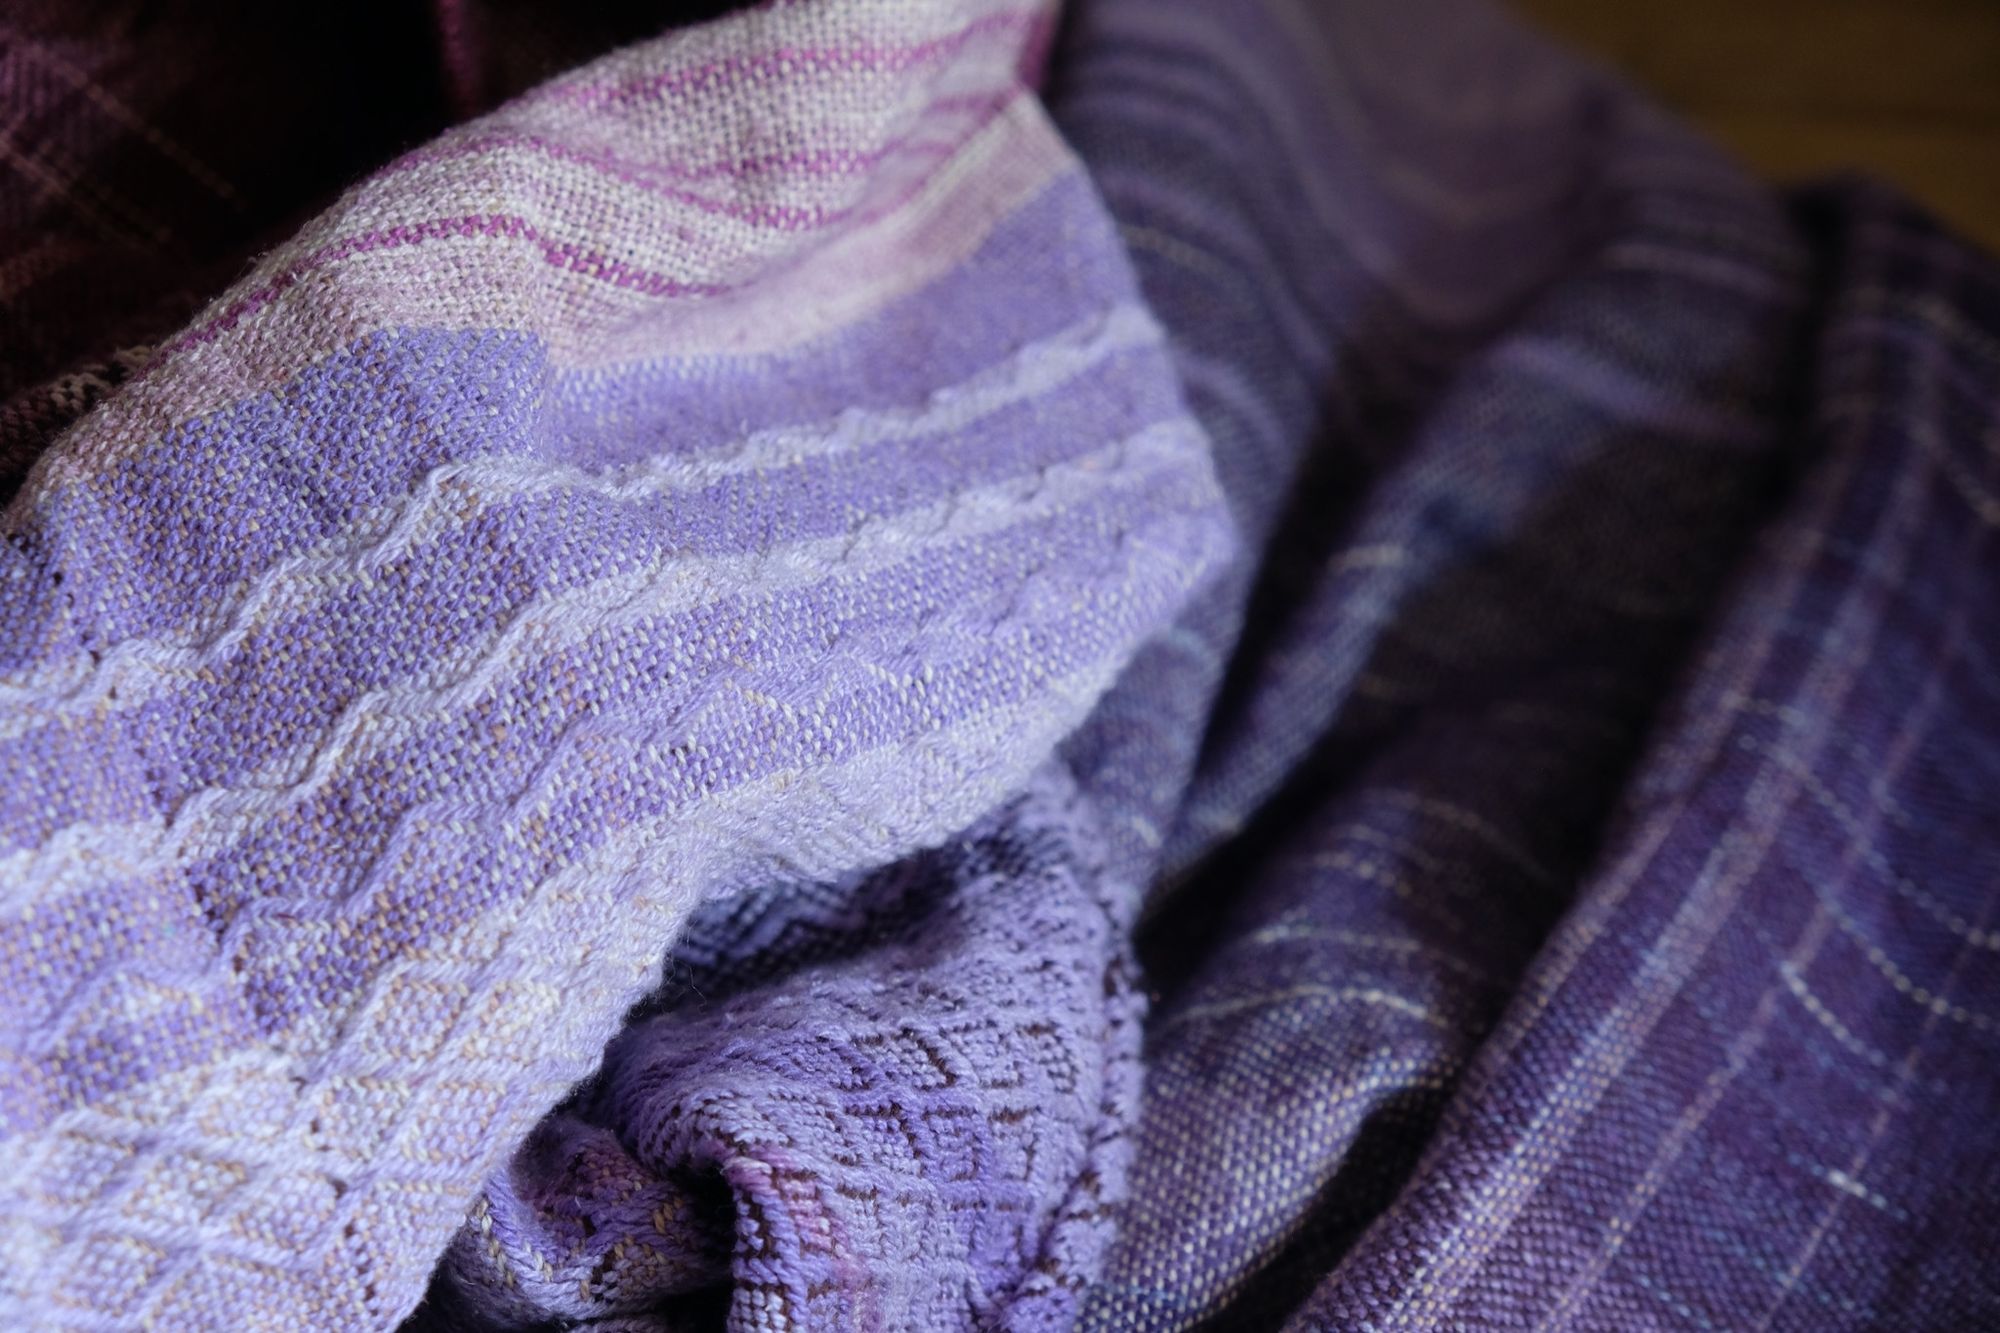 Brightly colored purple, blue, orange, green, black and pink handwoven fabric laying on a wooden floor. 